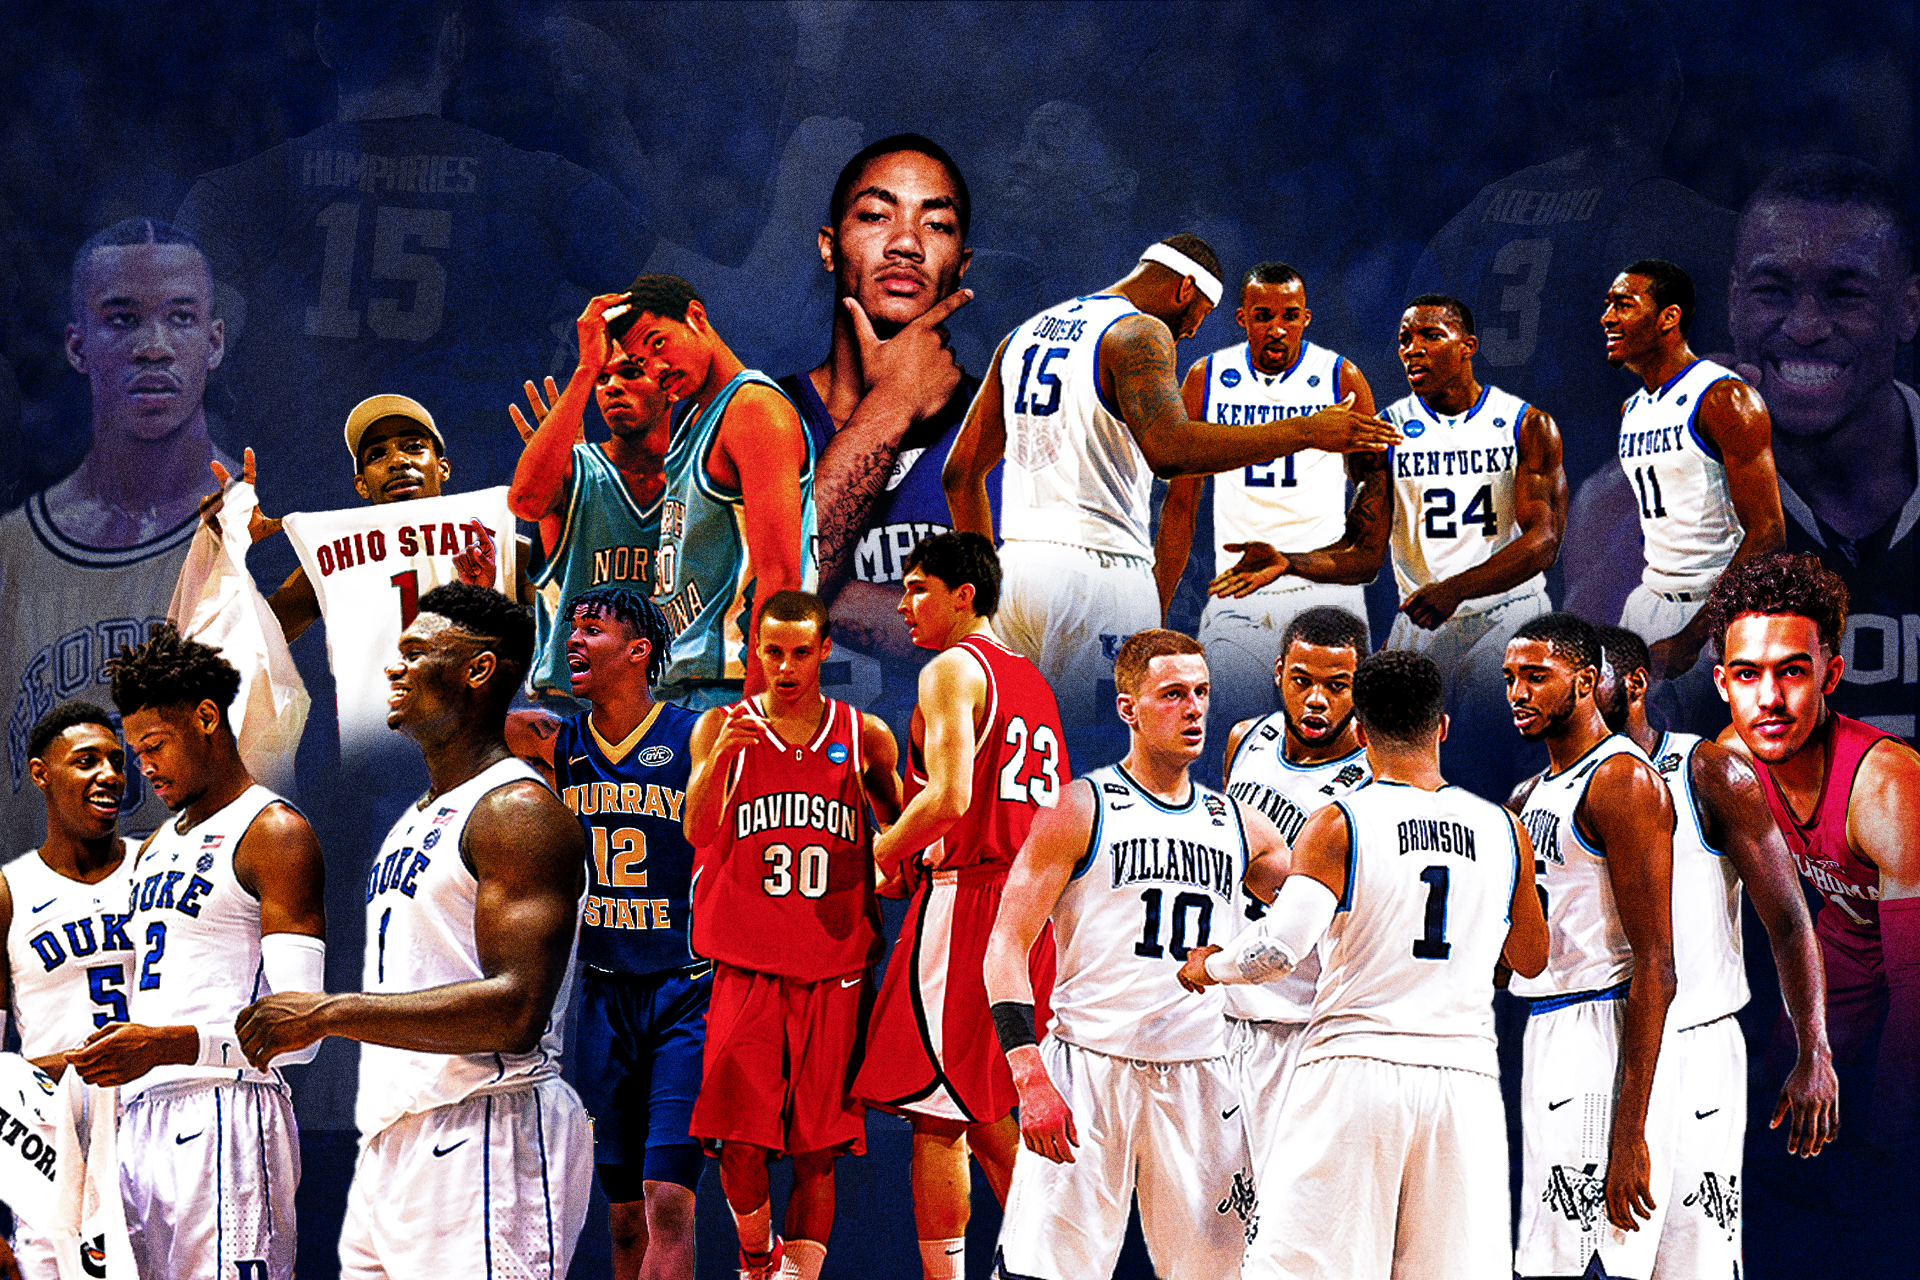 The 30 Most Influential NCAA MBB Teams of Mahaz News’s 30 Years